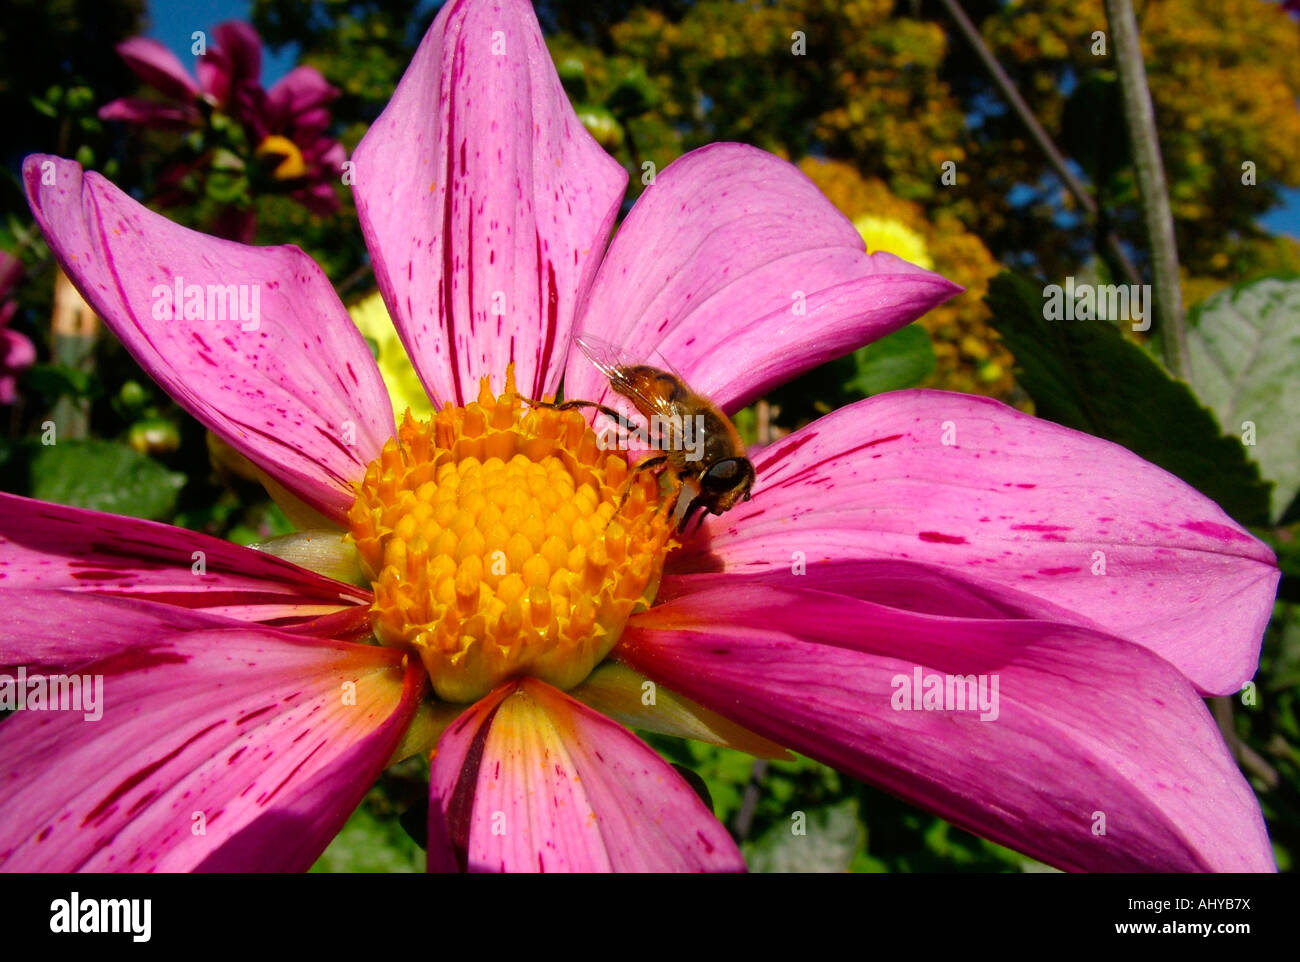 A Honey Bee collecting pollen on a pink purple Single Dahlia at the Dahlia Trial Garden at Point Defiance Park, Tacoma, WA, USA Stock Photo